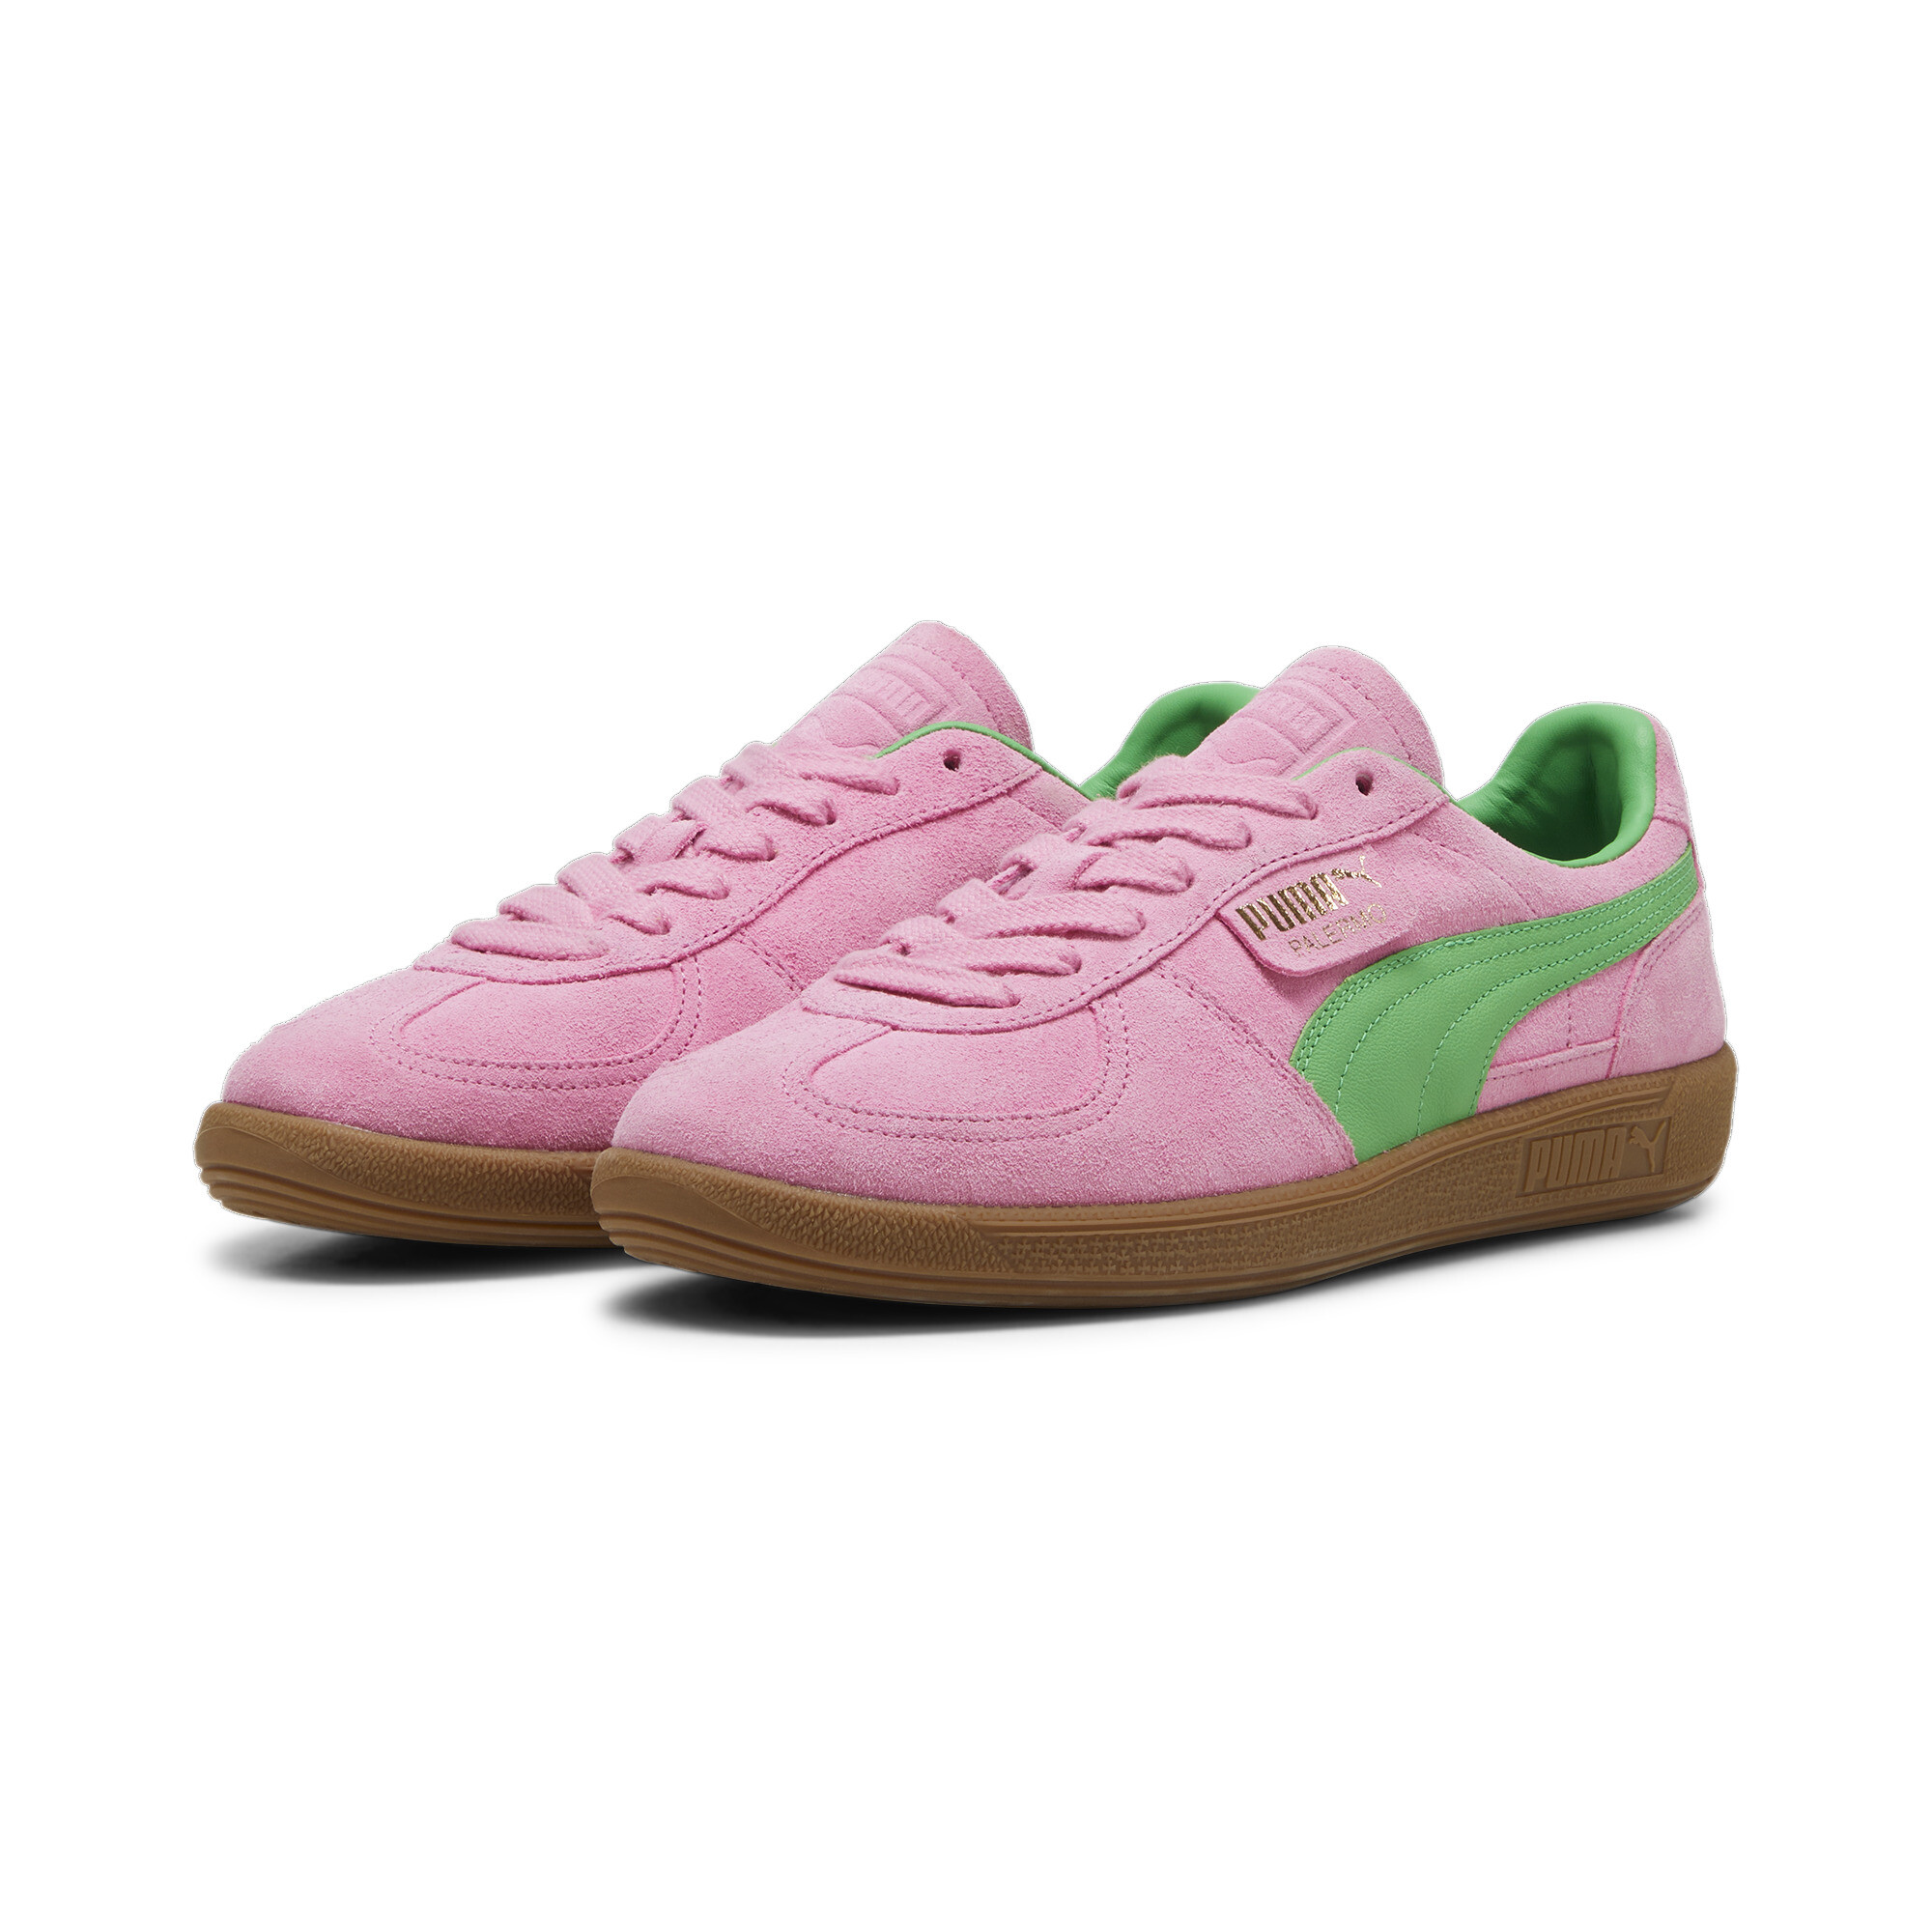 Men's PUMA Palermo Special Shoes In Pink, Size EU 39